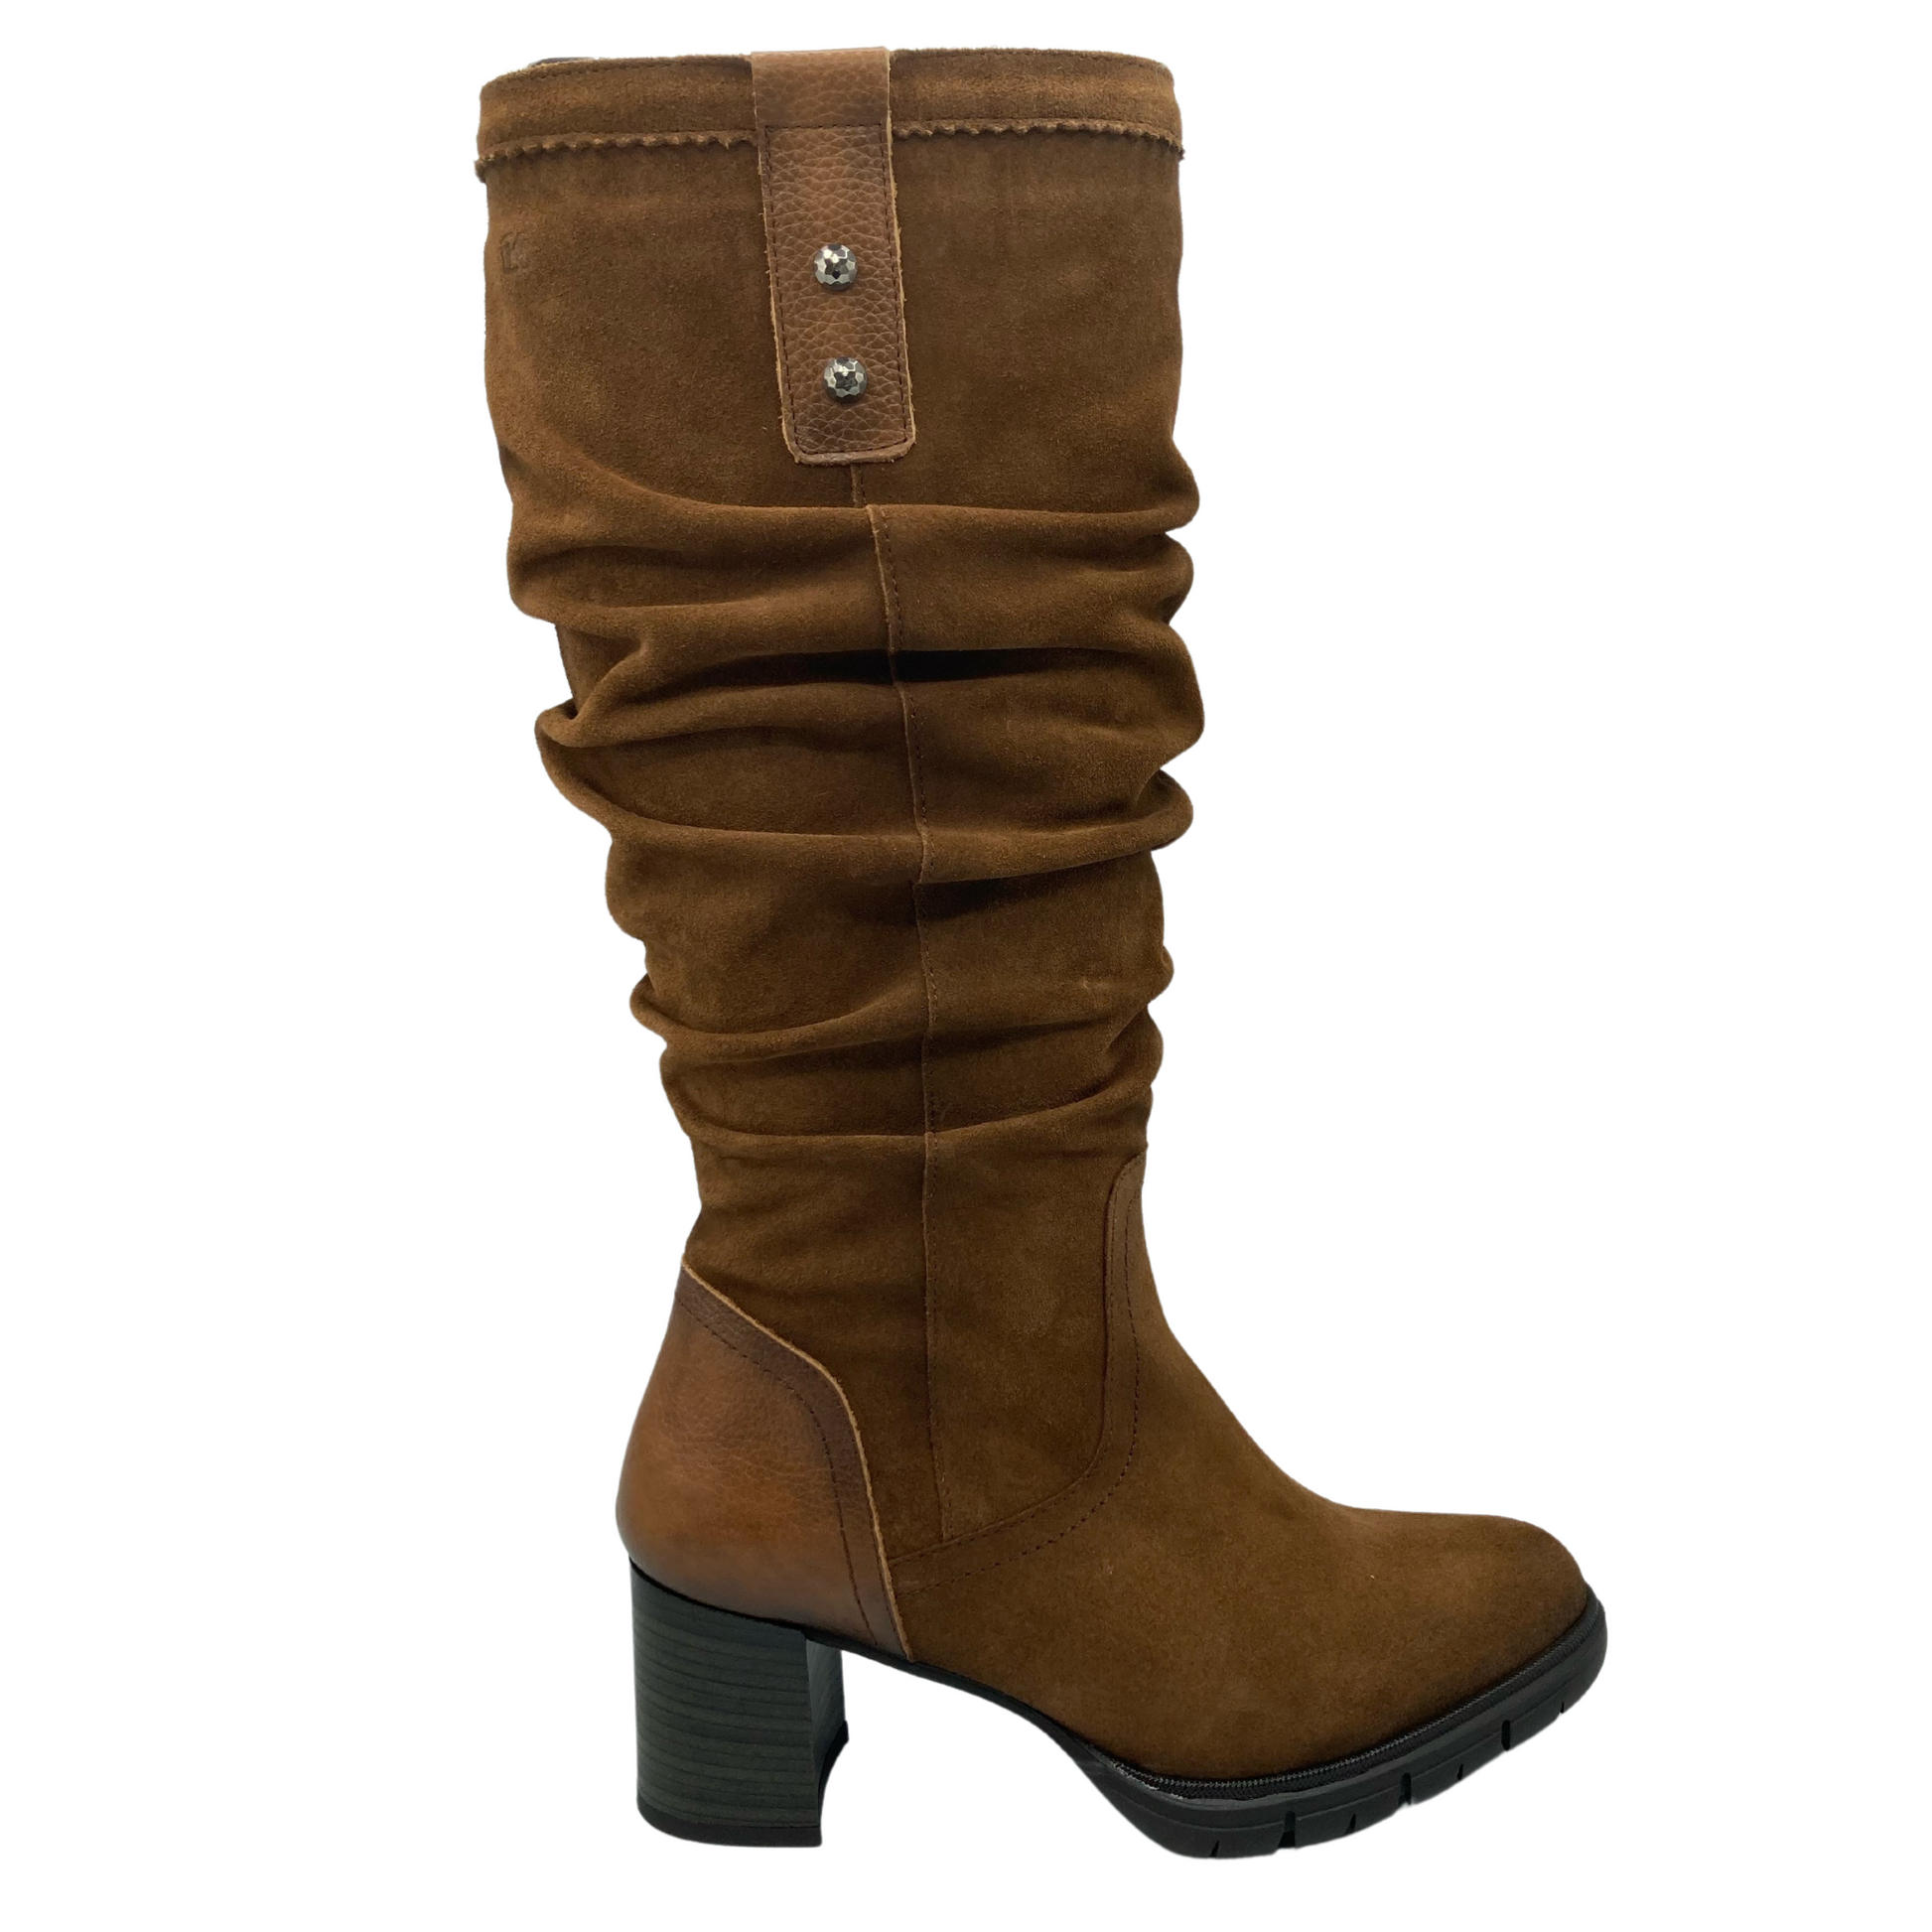 Right facing view of slouchy brown suede boot with black block heel